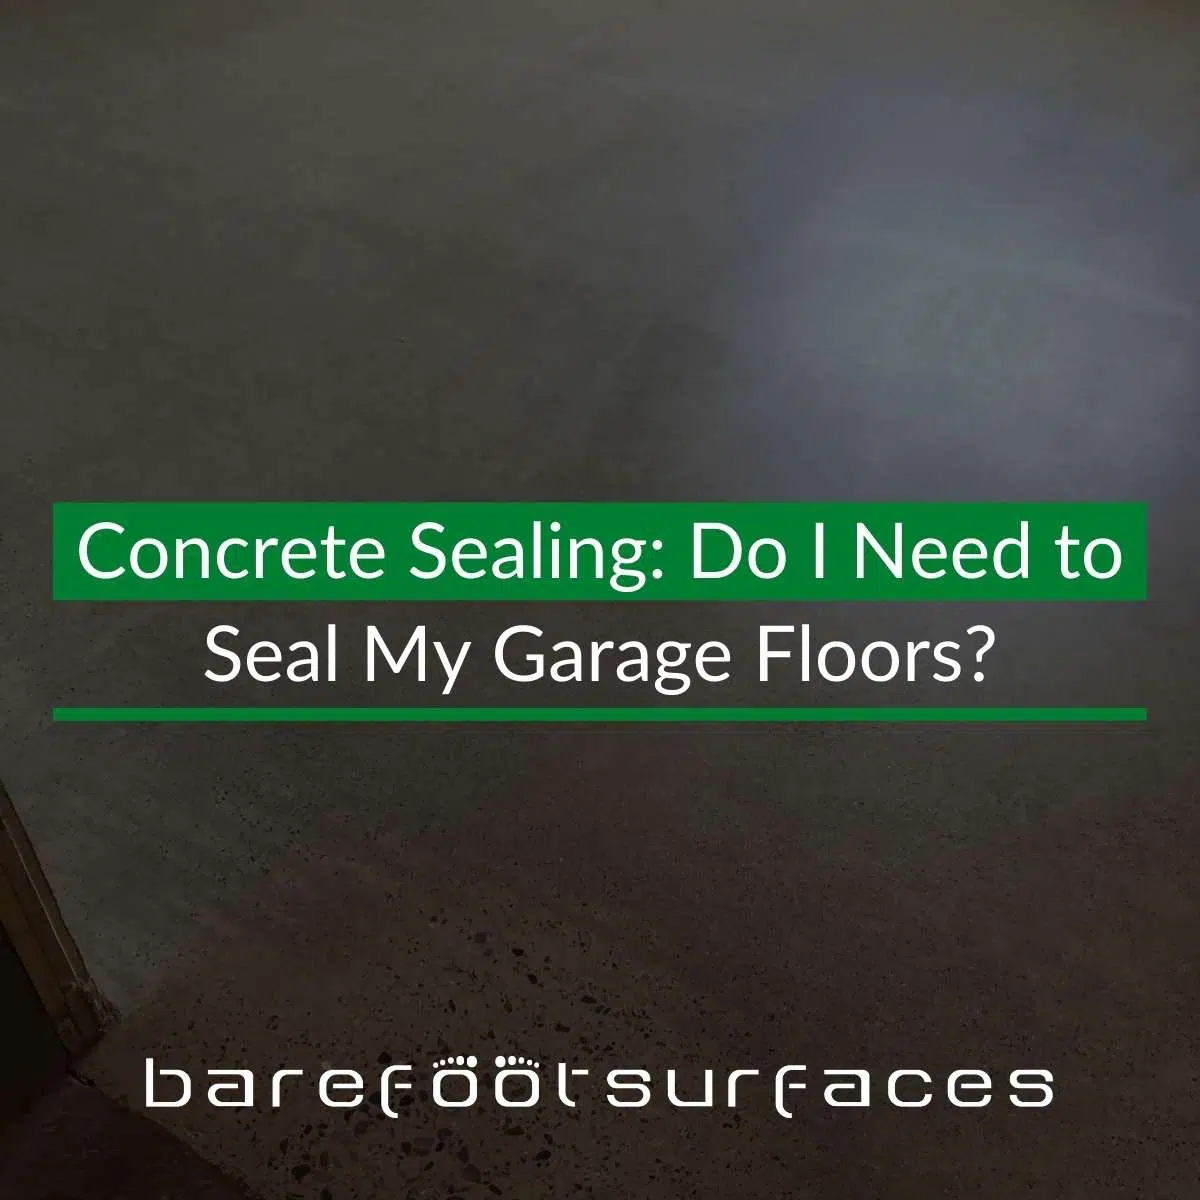 Concrete Sealing: Do I Need to Seal My Garage Floors?